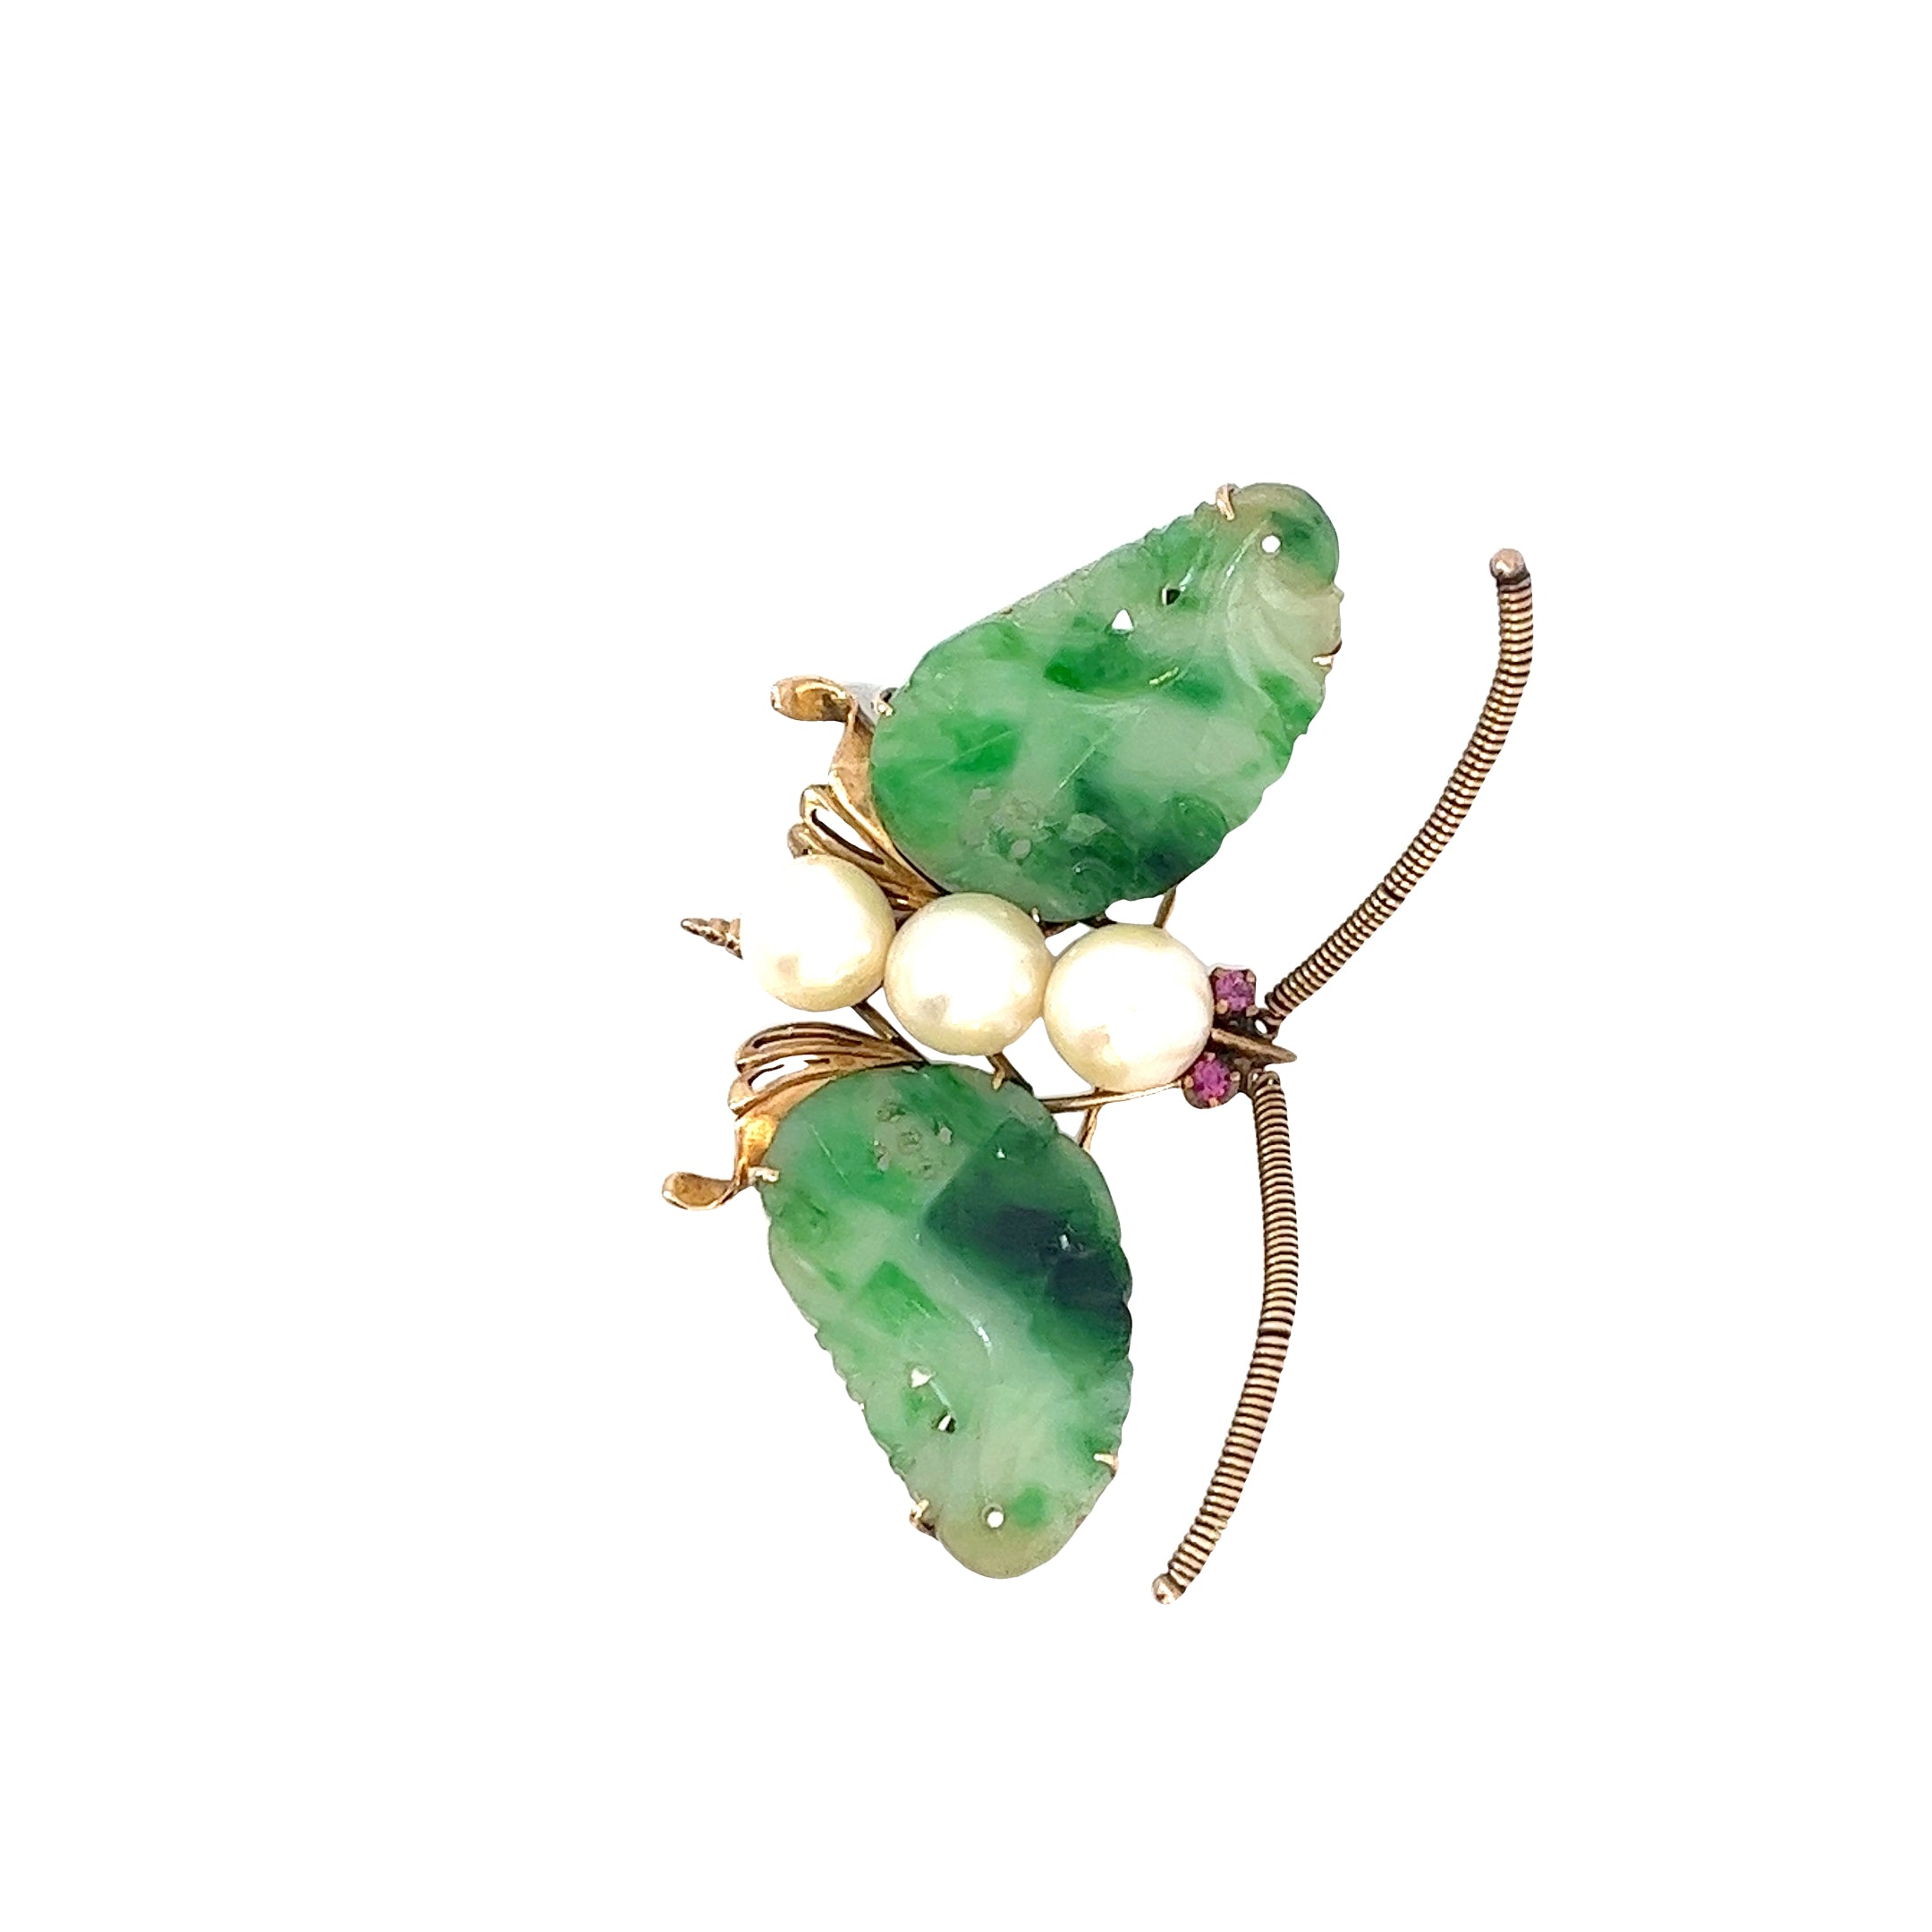 14K  YELLOW GOLD 3 PEARLS, RUBY EYE AND CARVED JADE "FEI CUI" TRANSLUCENT , COLOR MOTTLED GREEN , SPECIES : JADEITE JADE AND TYPE  A AND 10.71 GRAMS